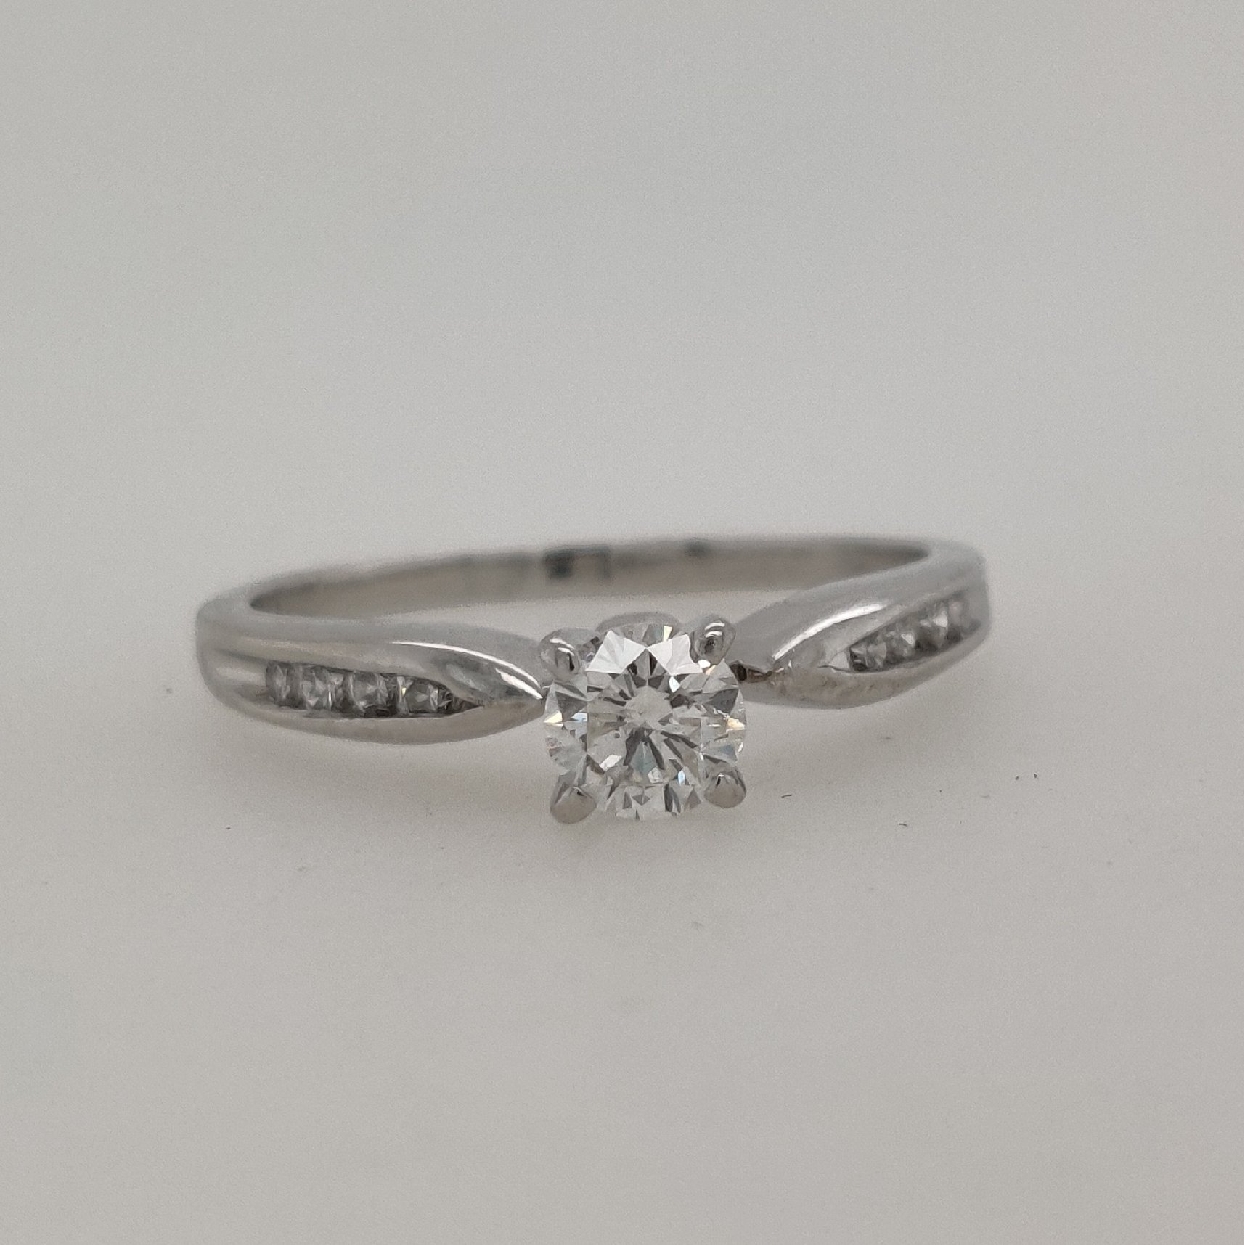 Platinum Solitaire Engagement Ring with Channel Set Diamonds on the Shank; Approximately 0.37CTTW; Size 5
Center Stone is approximately 0.27CT; H/SI2